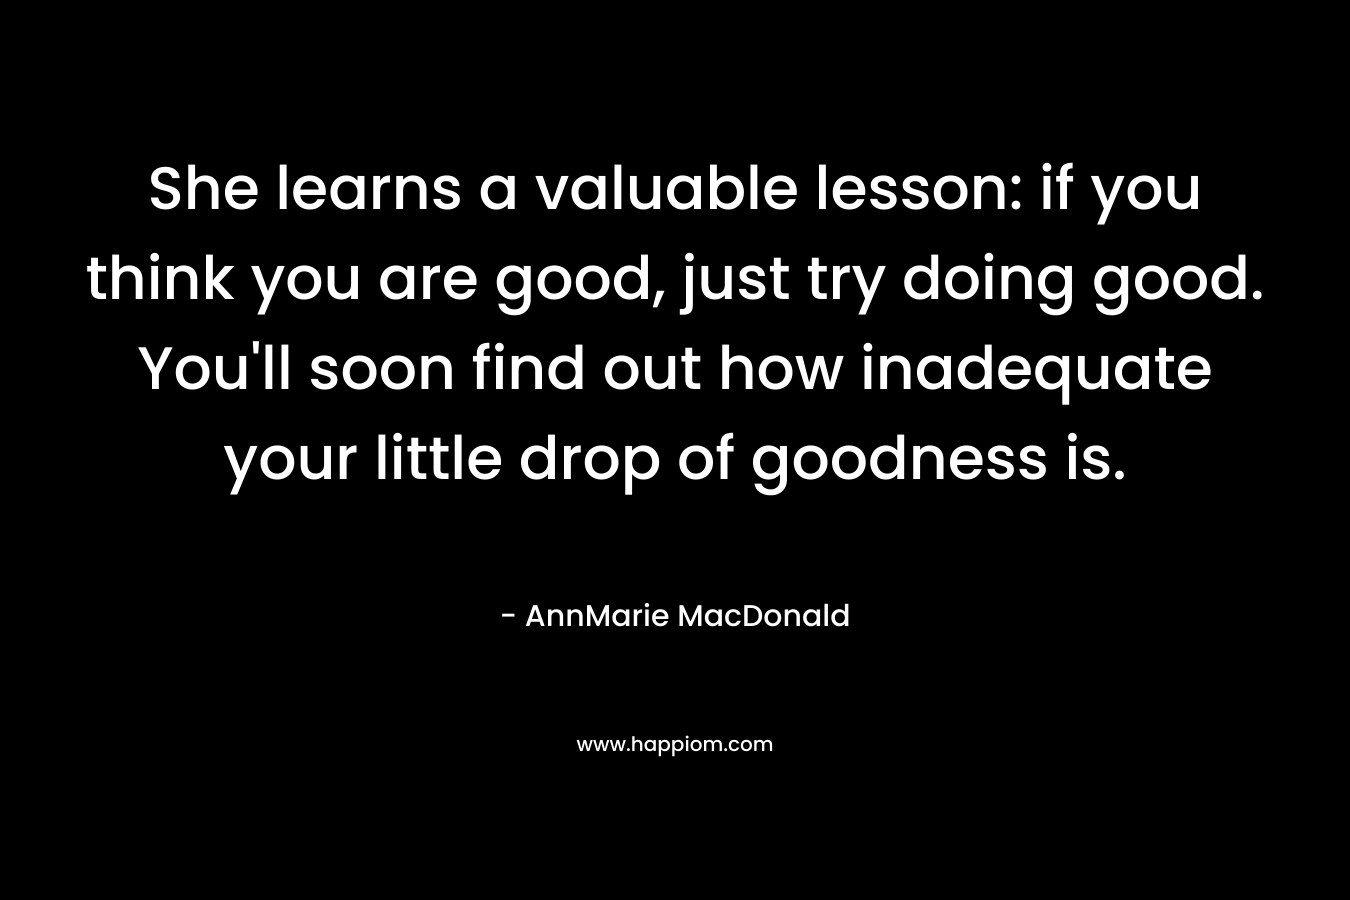 She learns a valuable lesson: if you think you are good, just try doing good. You'll soon find out how inadequate your little drop of goodness is.